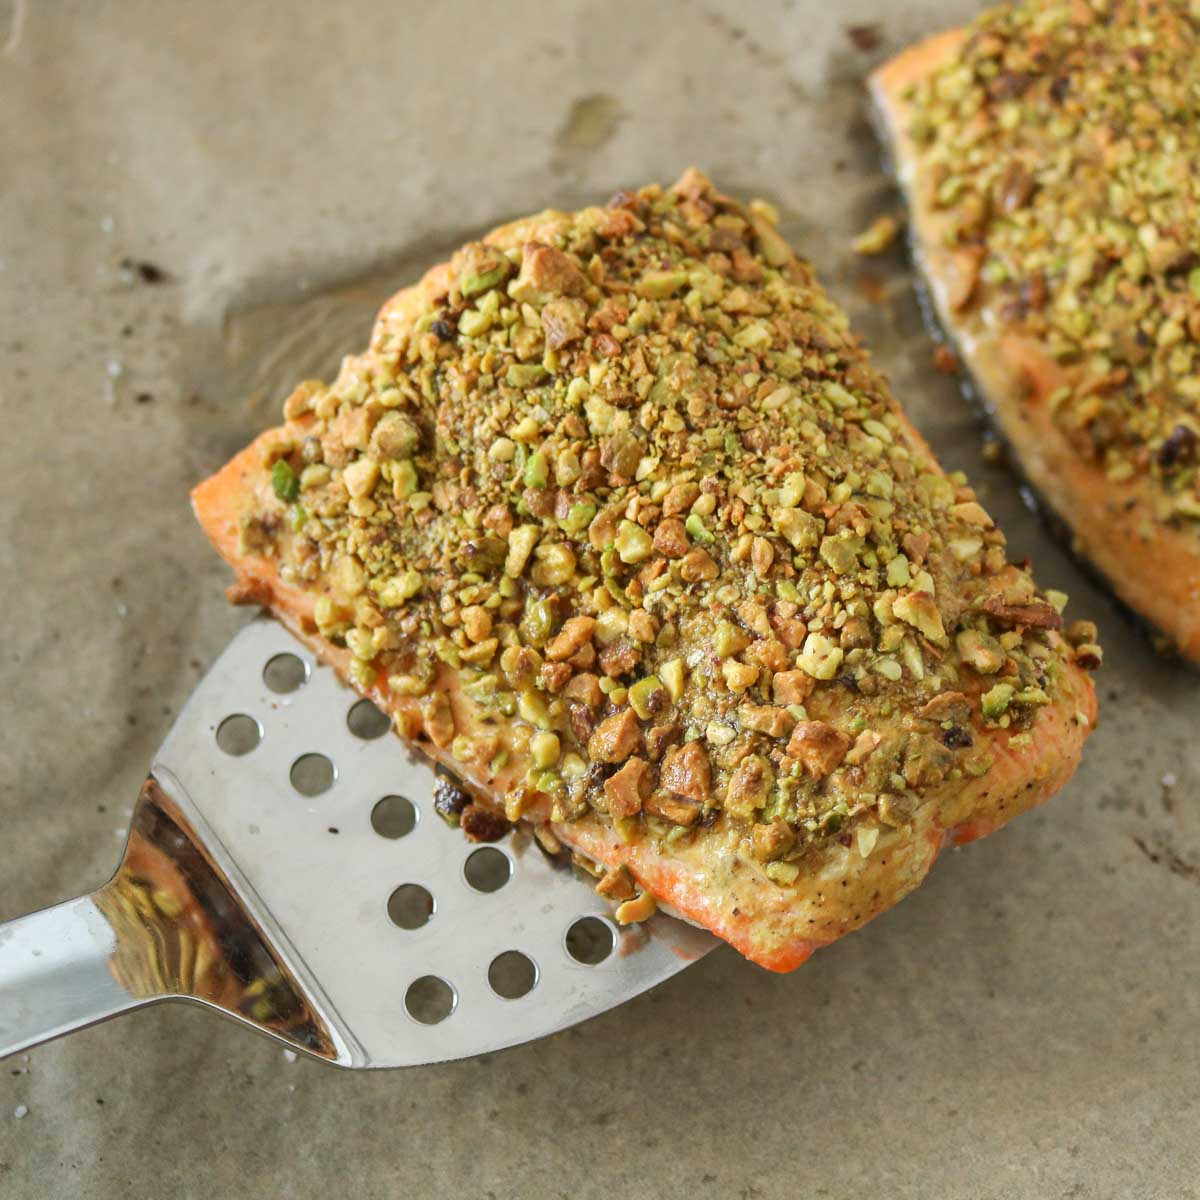 A spatula picking up a baked pistachio-crusted fish fillet from a parchment paper-lined sheet pan.